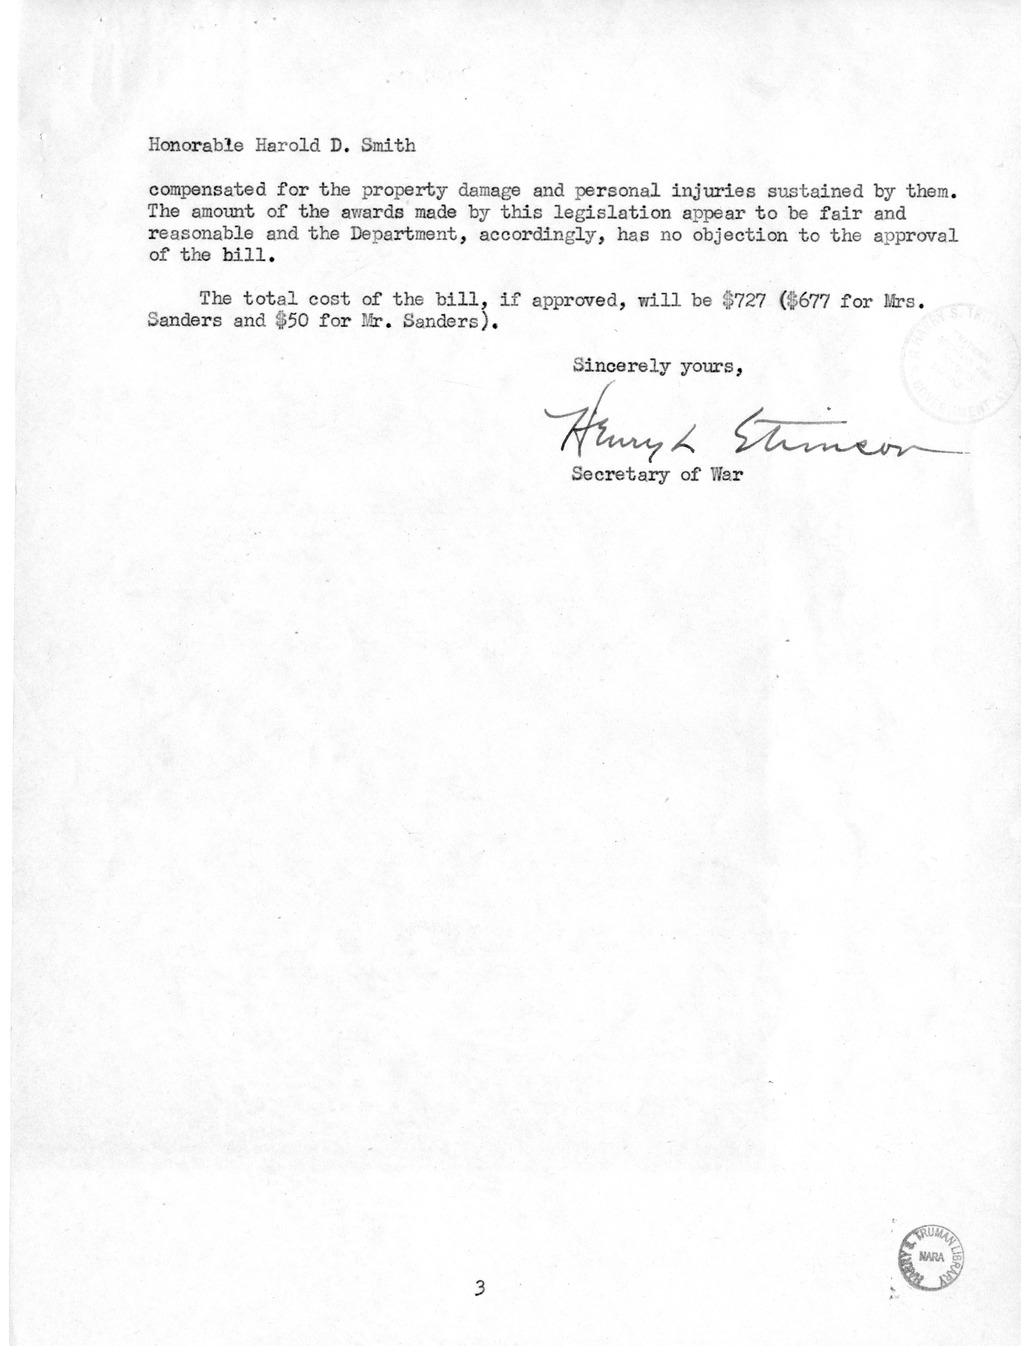 Memorandum from Frederick Bailey to M. C. Latta, S. 956, For the Relief of Mr. and Mrs. Stephen E. Sanders, with Attachments